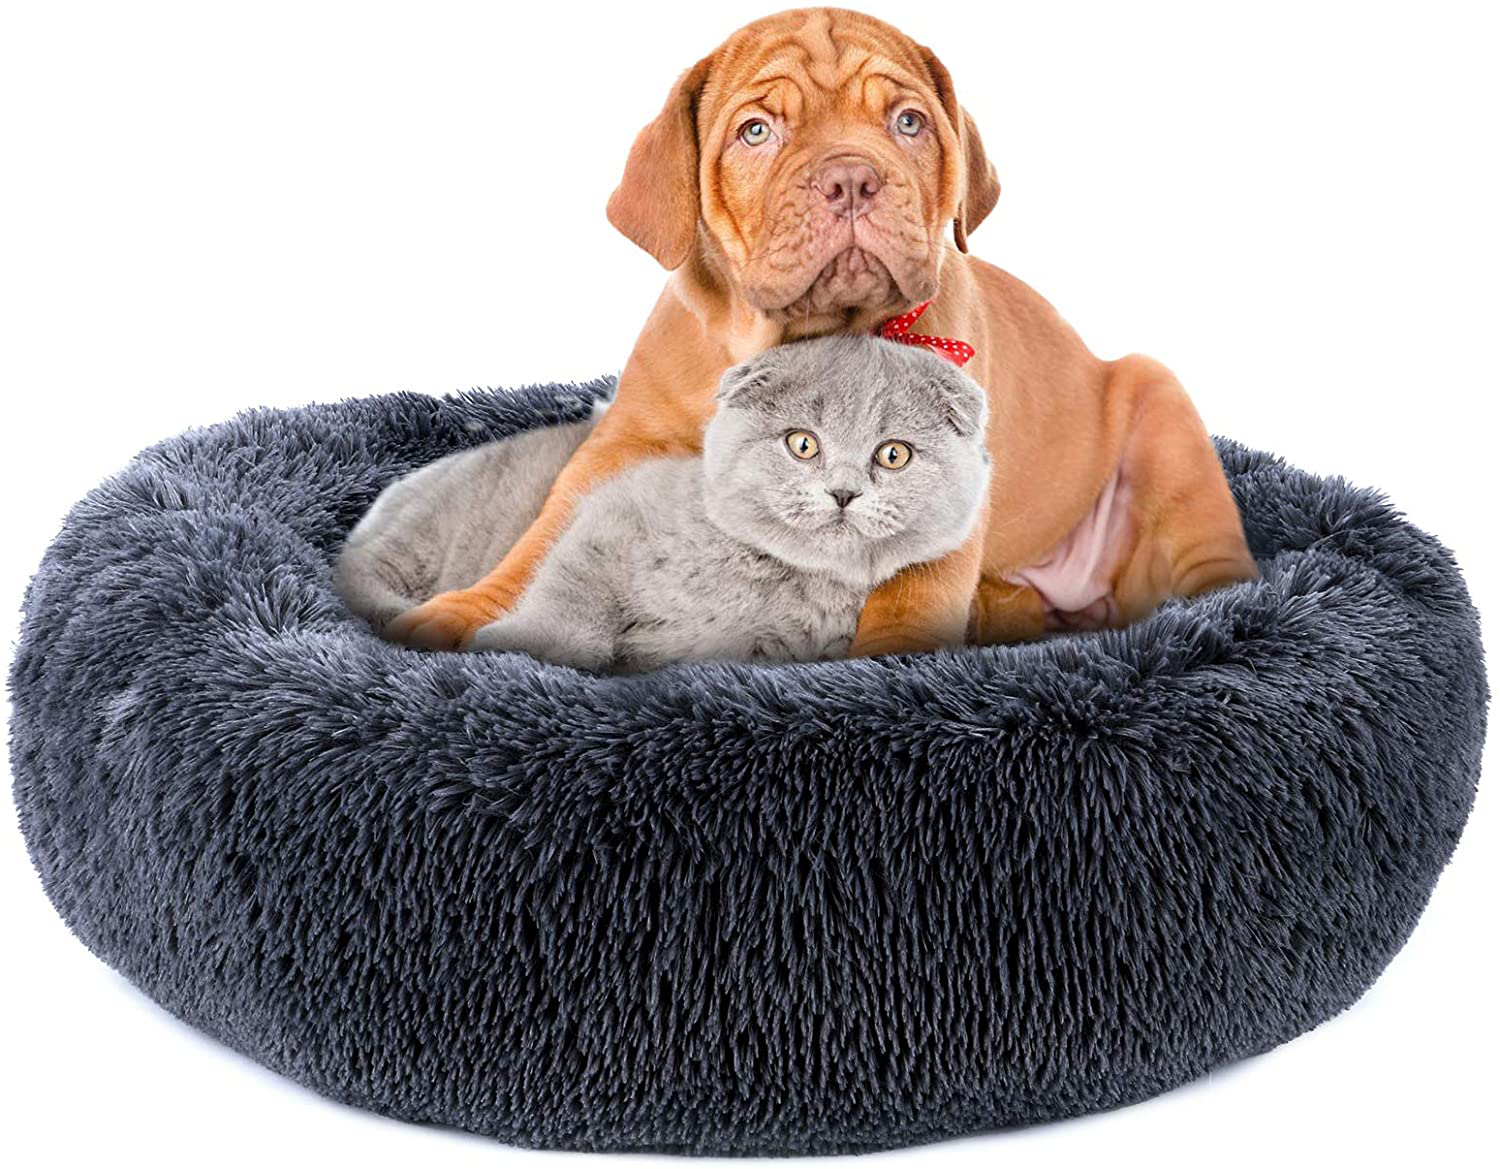 Pjyucien Calming Dog Bed Cat Bed, Large Medium Small Pet Beds, Soft Cozy Donut Cuddler round Plush Beds for Dogs Cats, Waterproof & Anti-Slip Bottom, Machine Washable Animals & Pet Supplies > Pet Supplies > Dog Supplies > Dog Beds PJYuCien Dark grey Small 